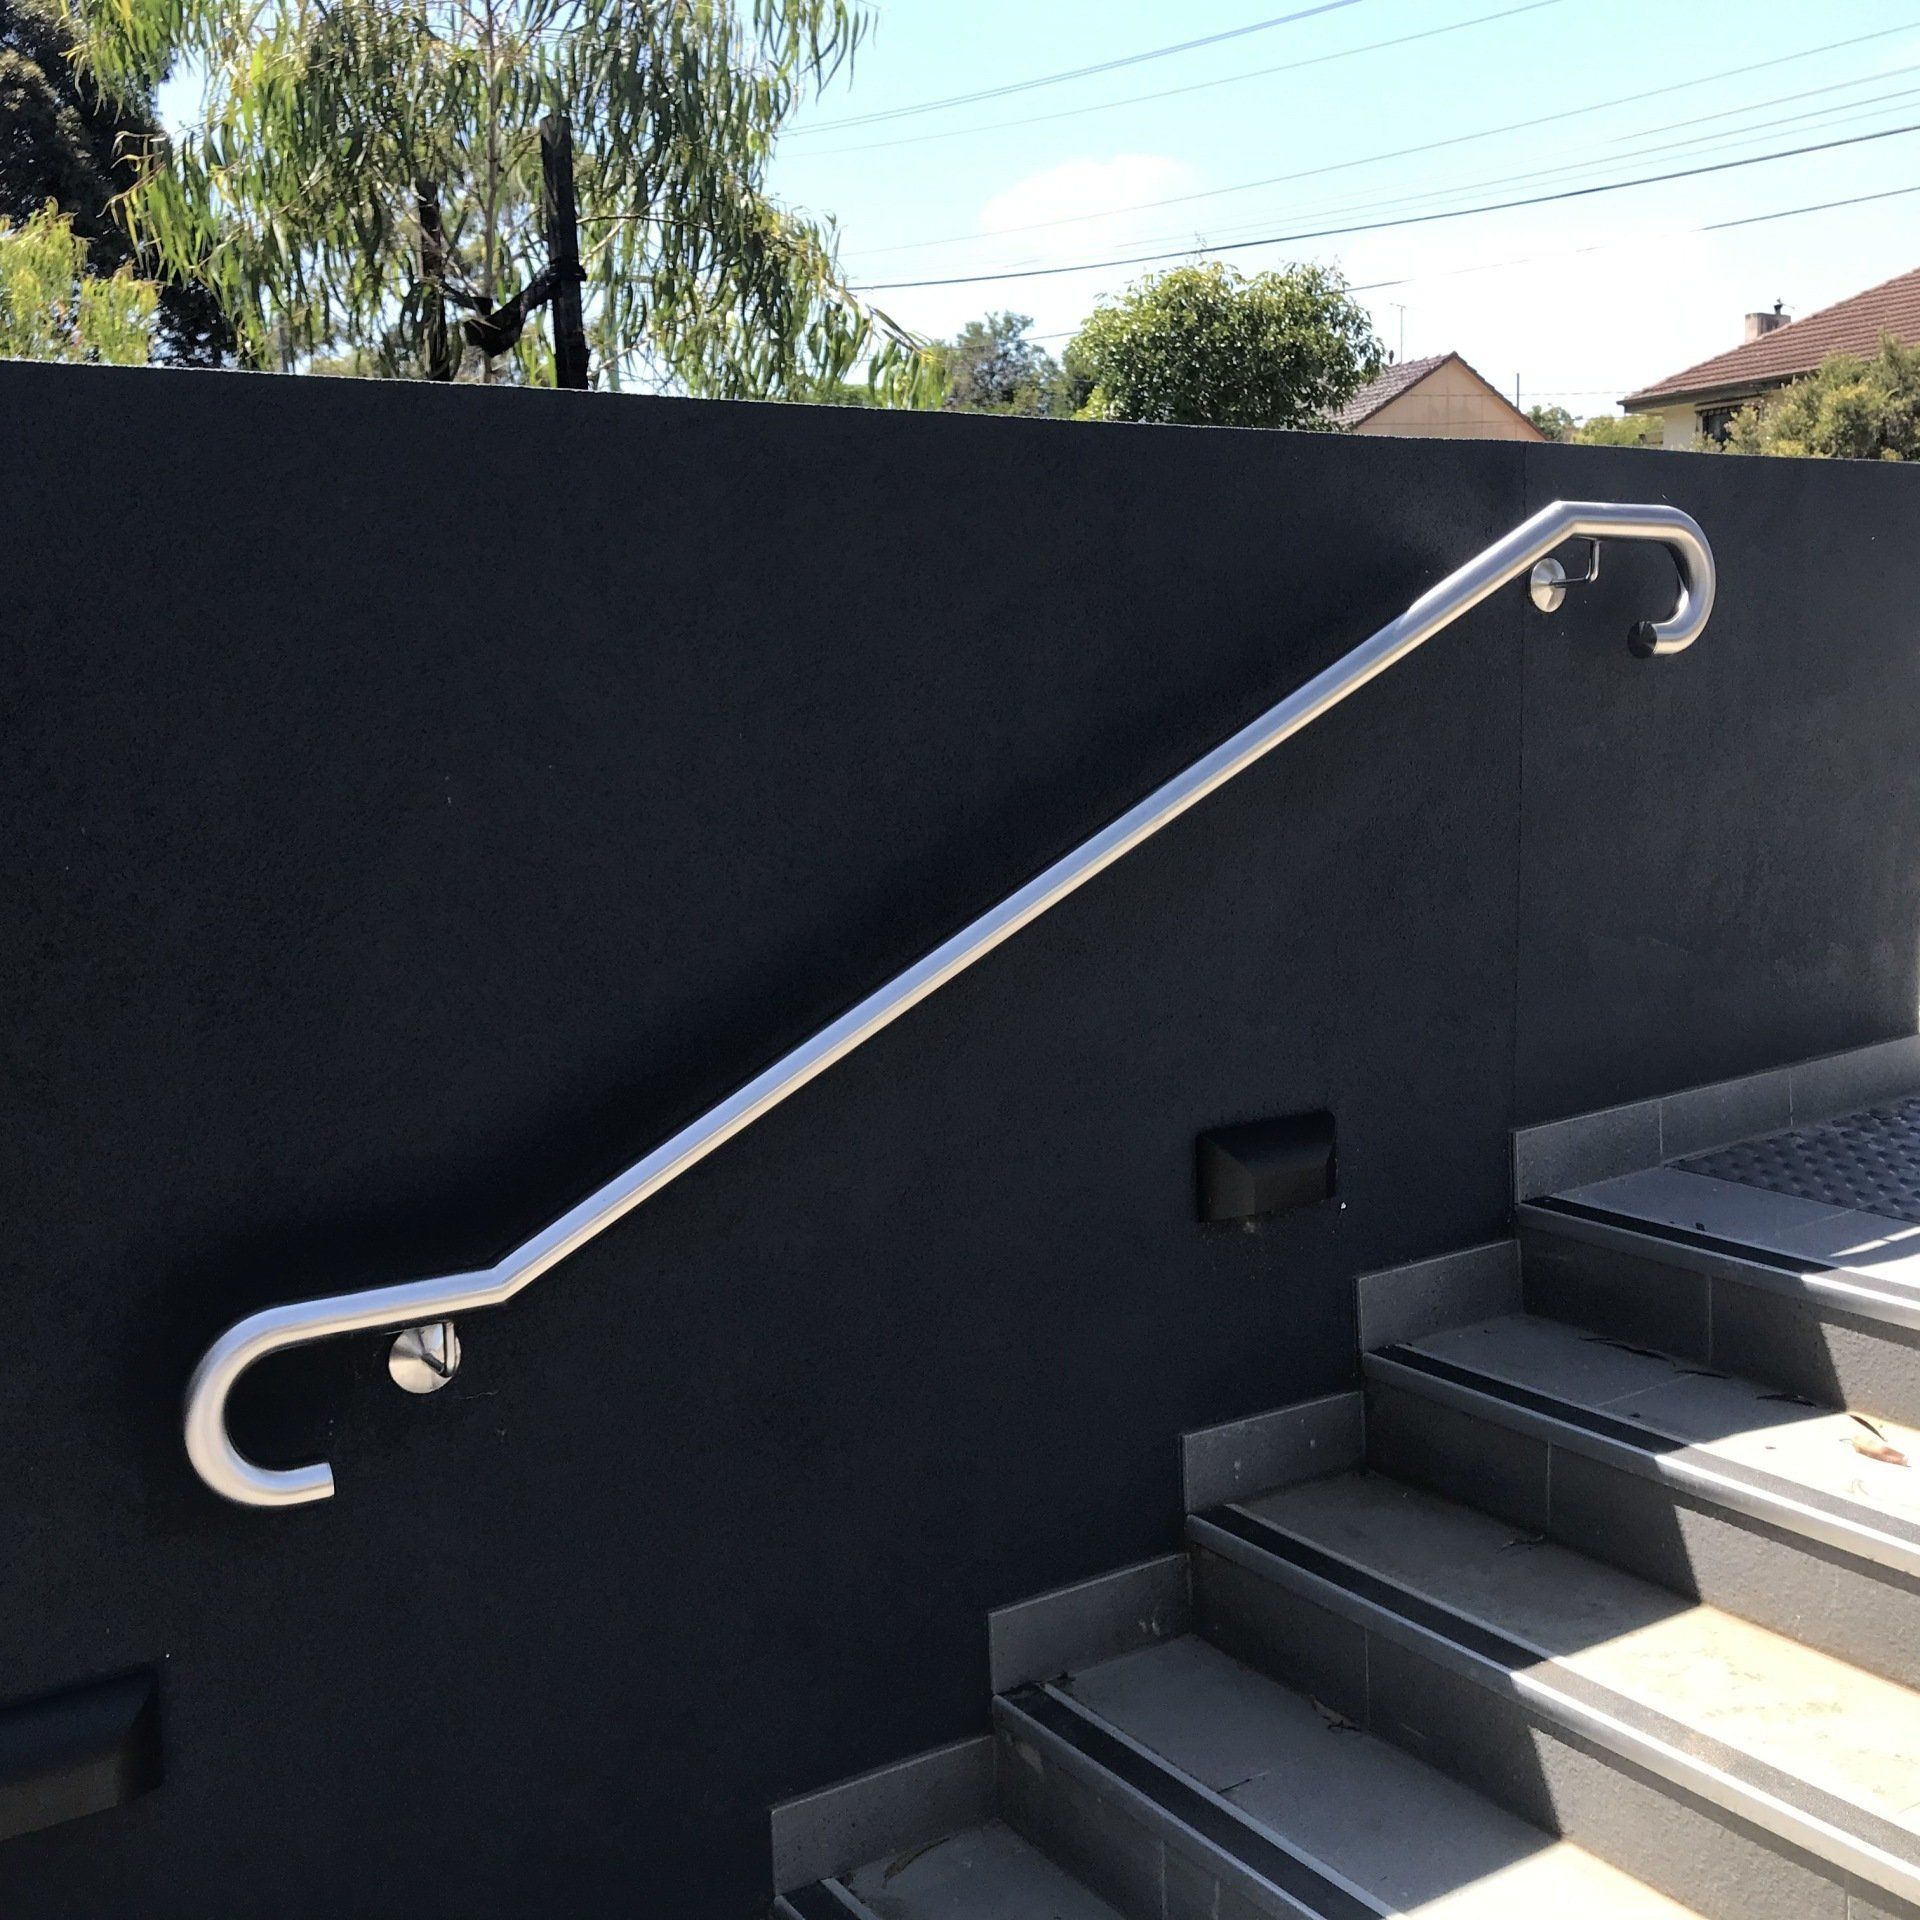 Wall mounted stainless steel handrail to assist with walking down a set of stairs